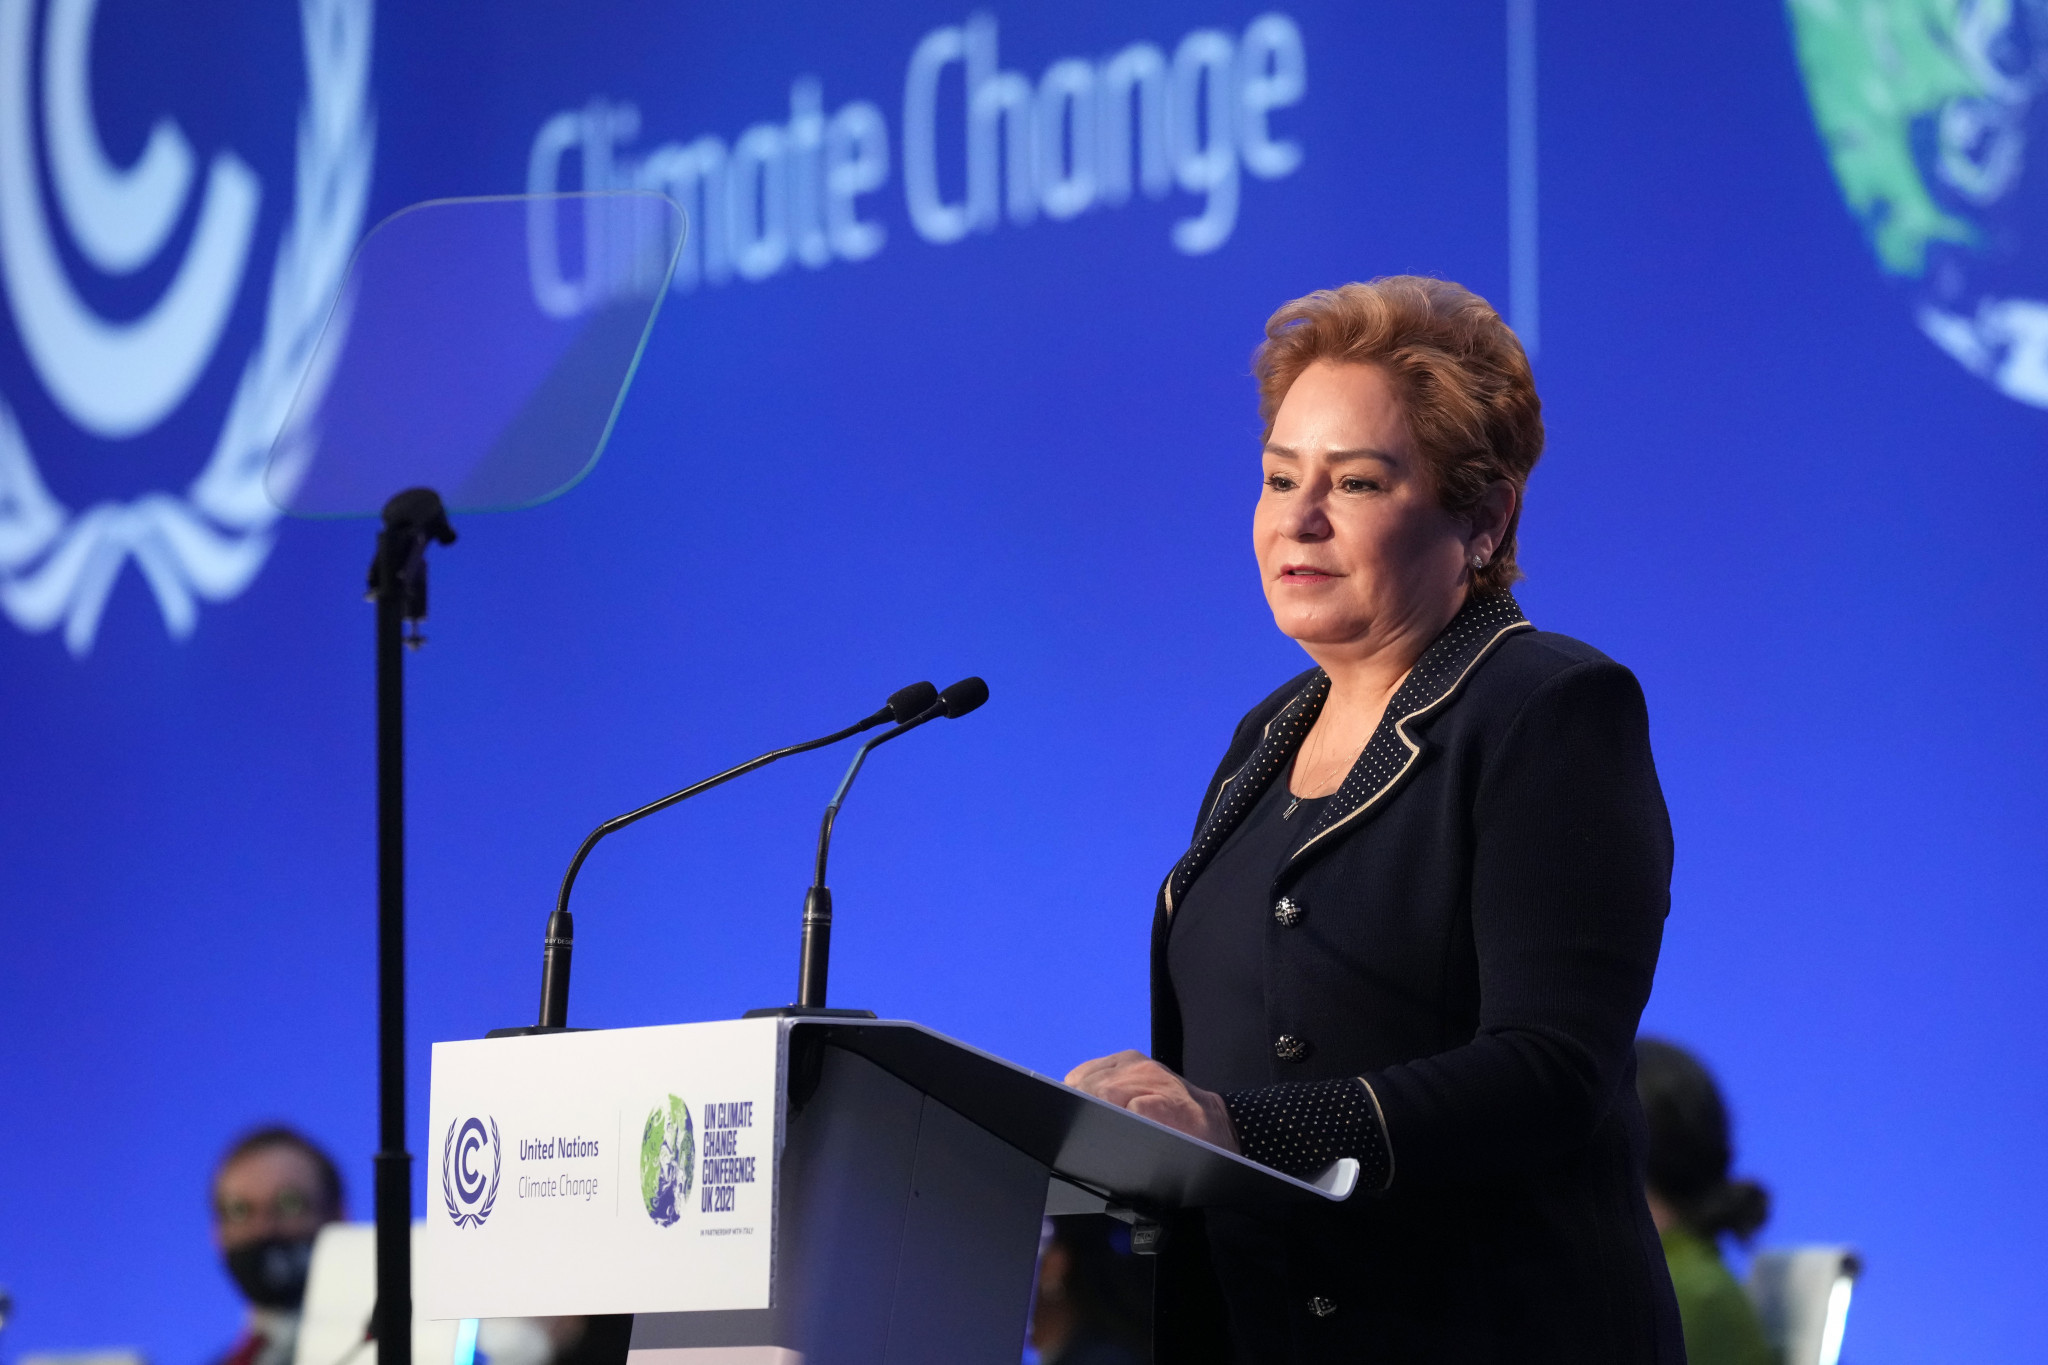 Mexico's UN Climate Change executive secretary Patricia Espinosa revealed the Sports for Climate Action Framework goal of achieving net-zero emissions by 2040 at COP26 ©Getty Images